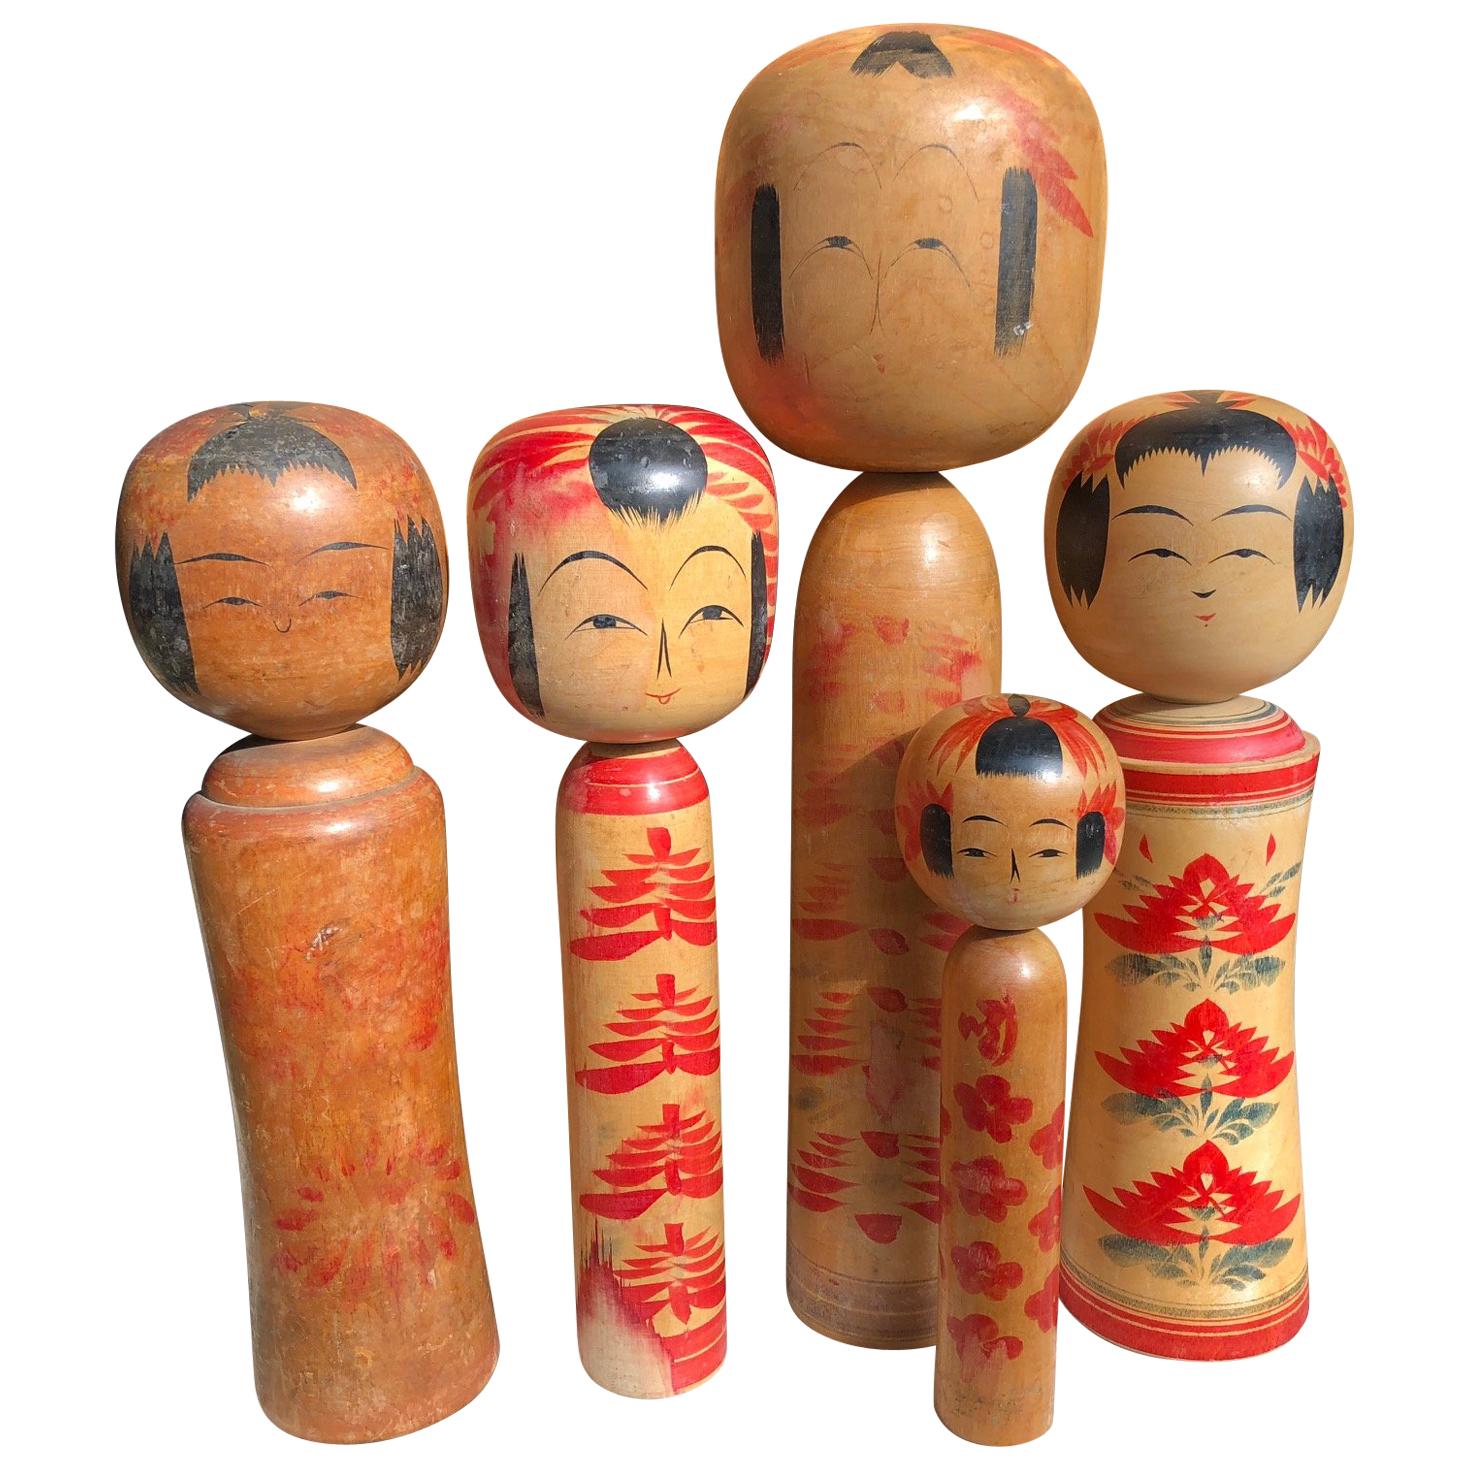 Family Five Old Japanese Famous Kokeshi Dolls, All Hand-Painted and Signed